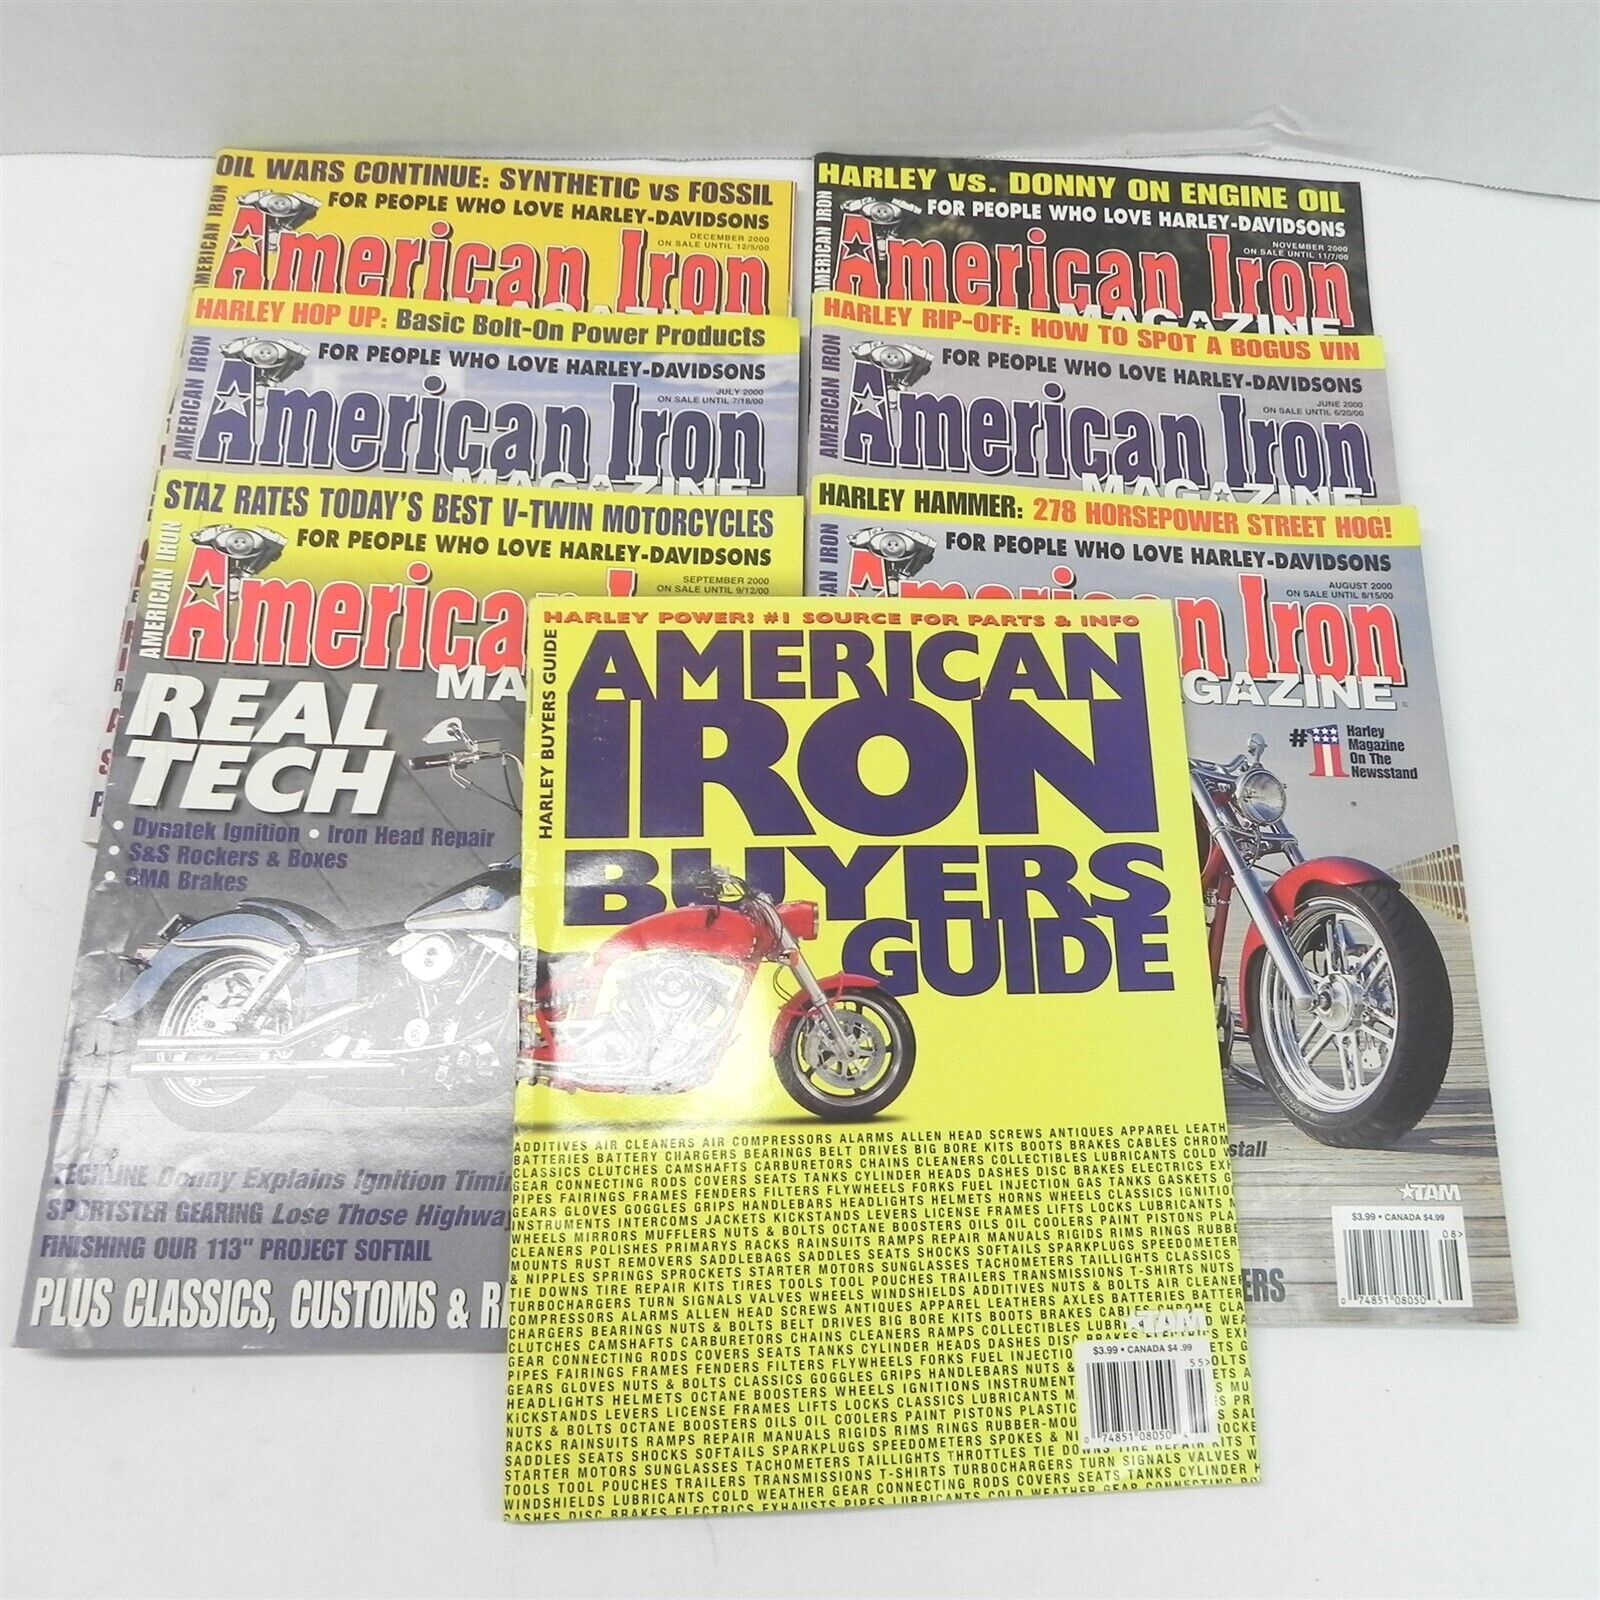 VINTAGE 2000 LOT OF 7 ISSUES AMERICAN IRON MOTORCYCLE MAGAZINE HARLEYS CHOPPERS